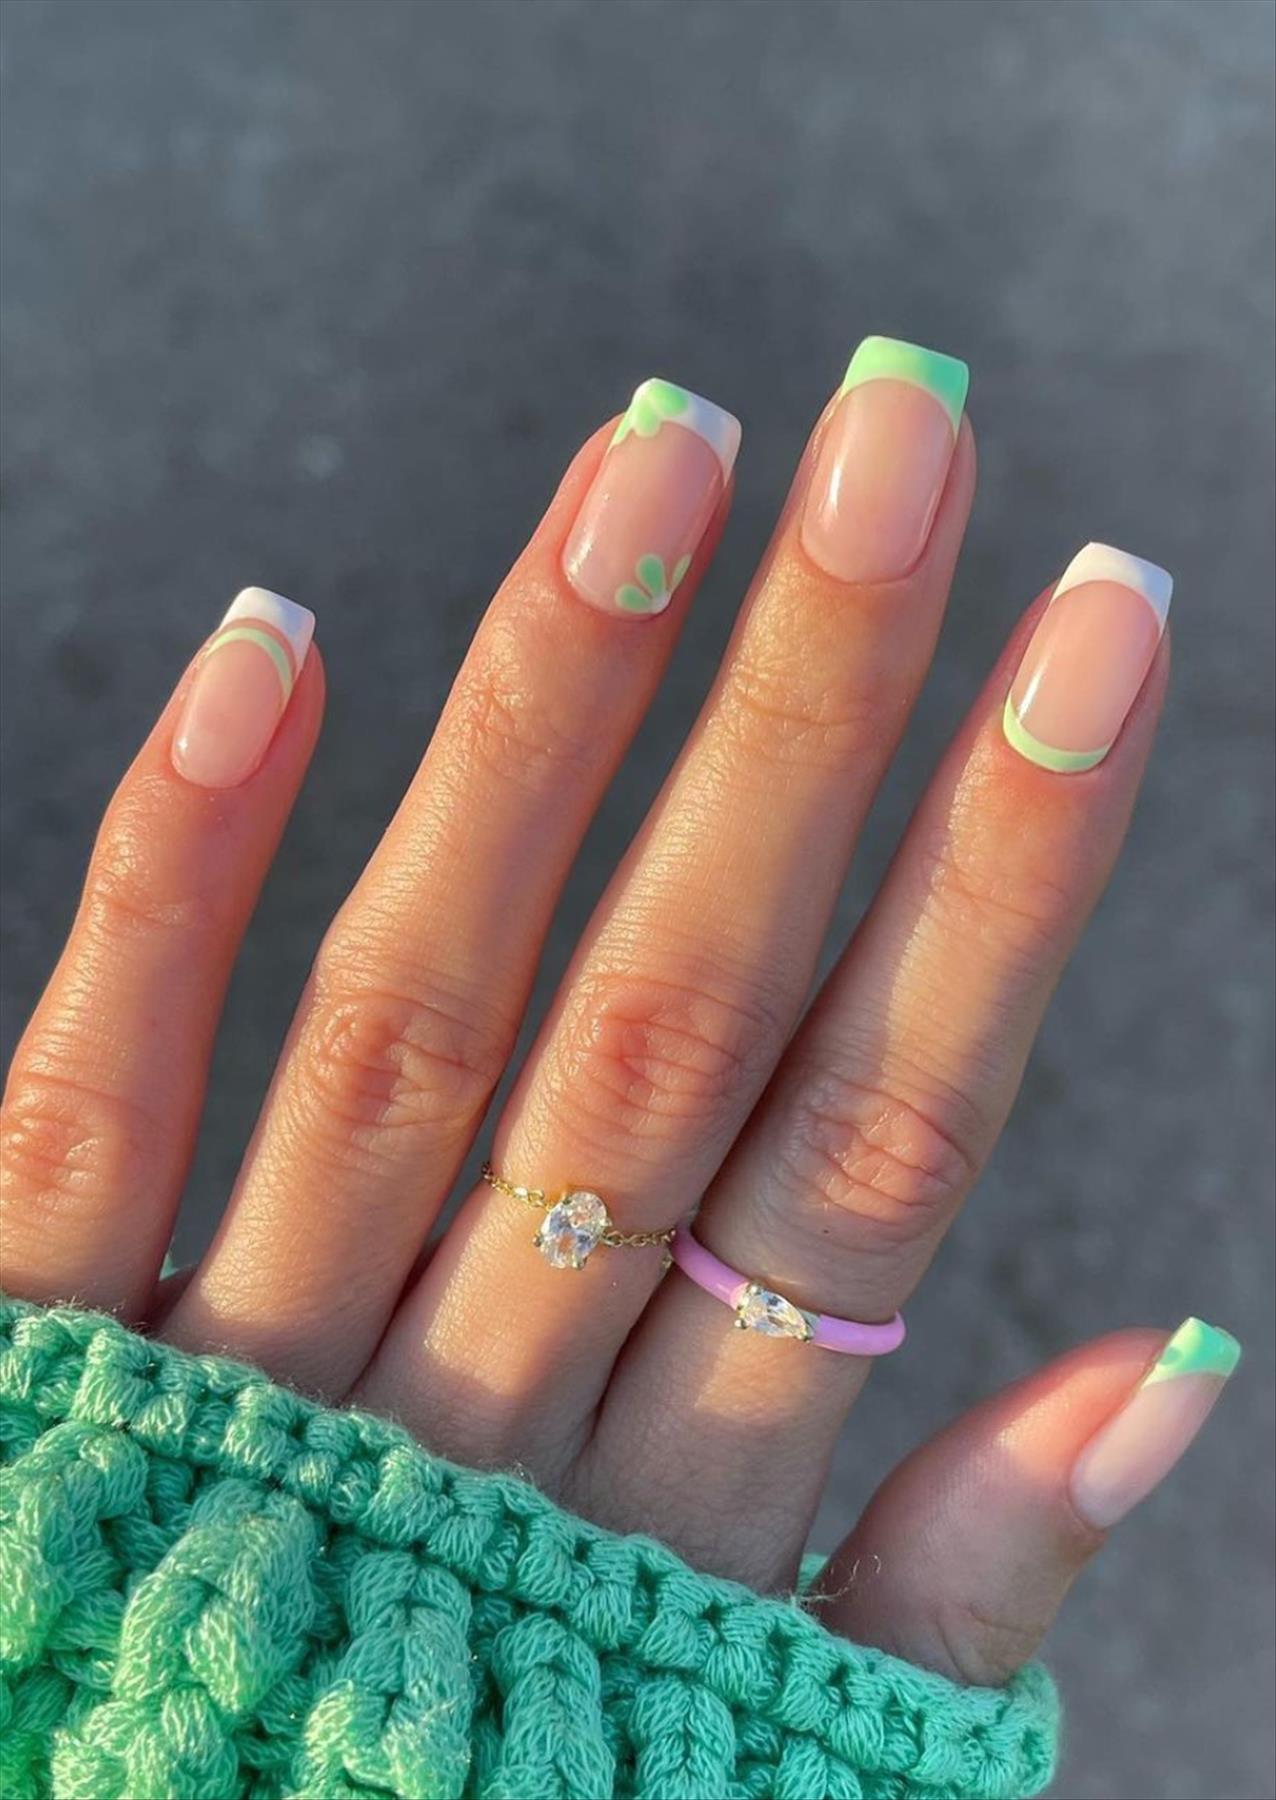 Best French tip nails for Summer mani 2022